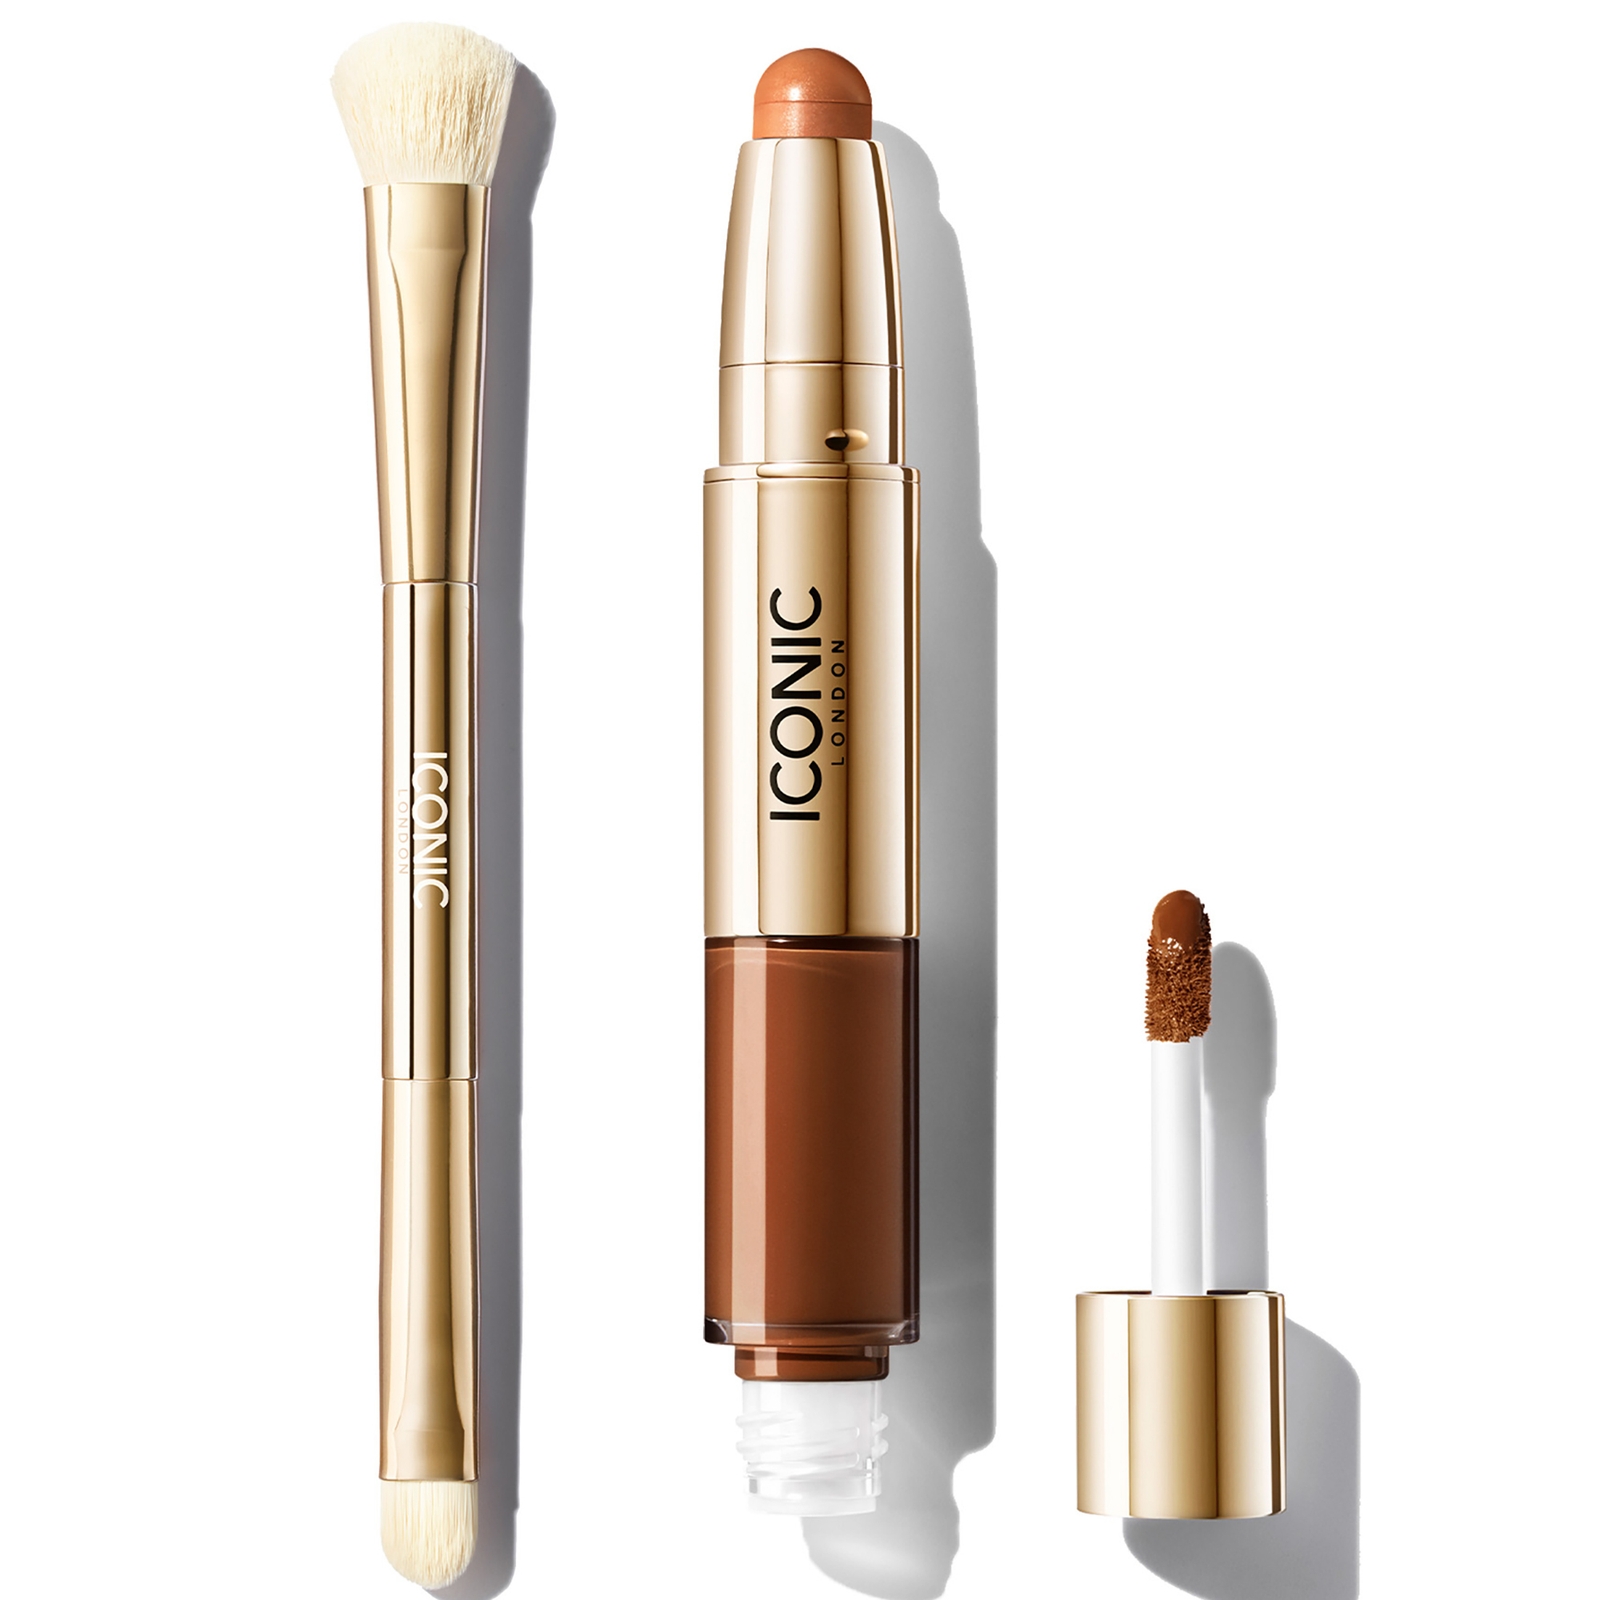 Iconic London Radiant Concealer And Brush Bundle (various Shades) - Golden Rich